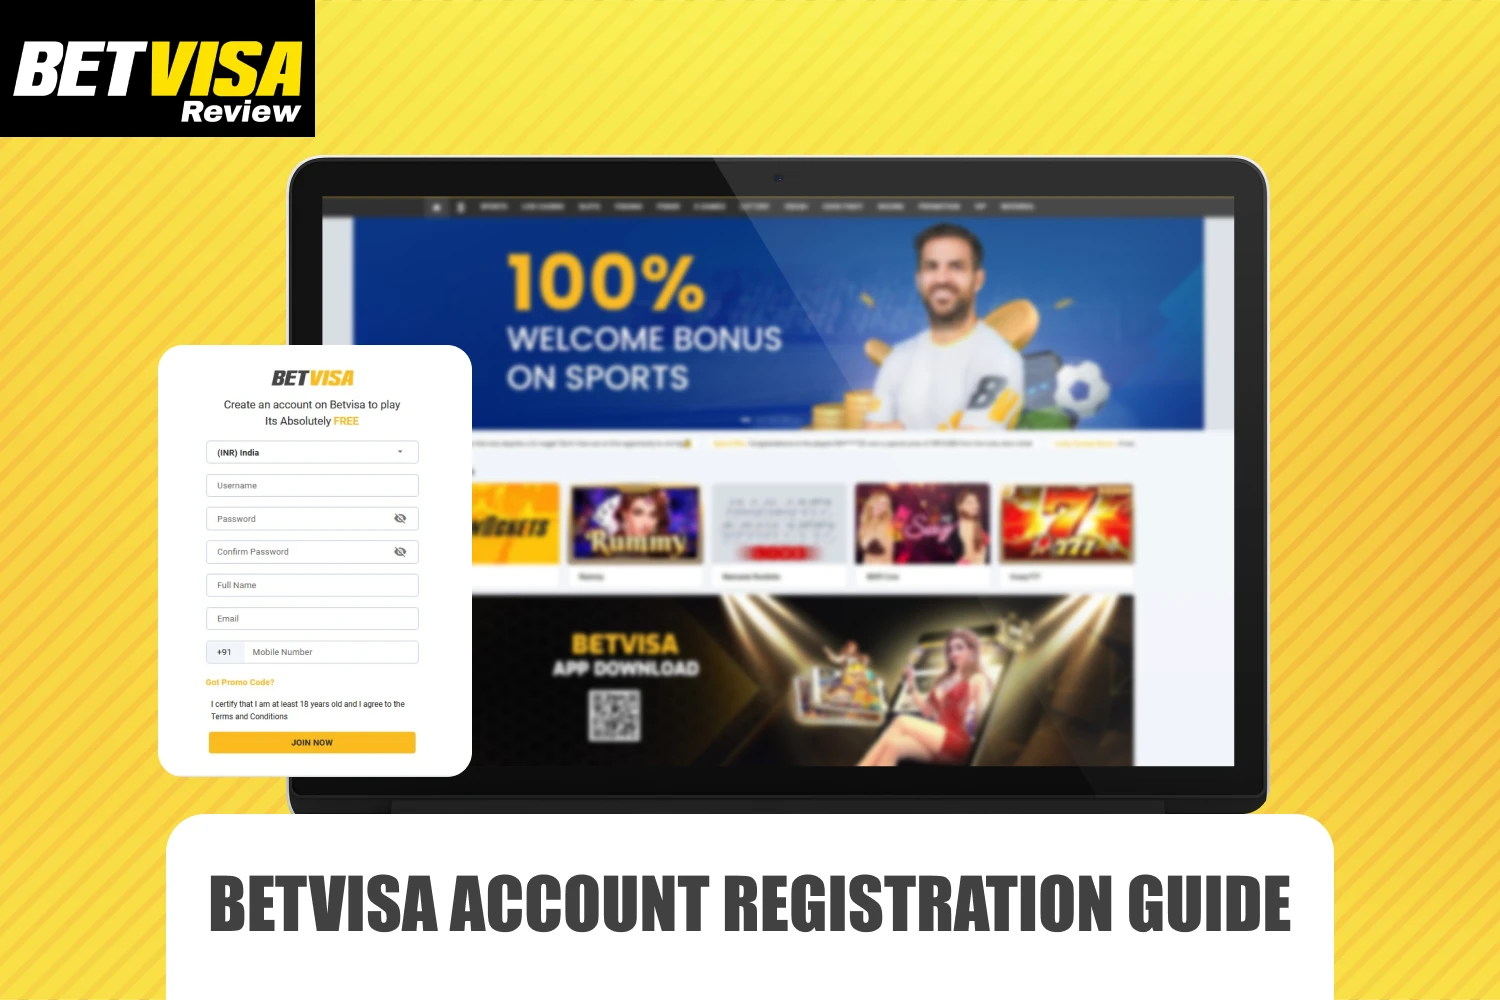 After registering with Betvisa, players from India will have access to all the entertainment and features of the platform